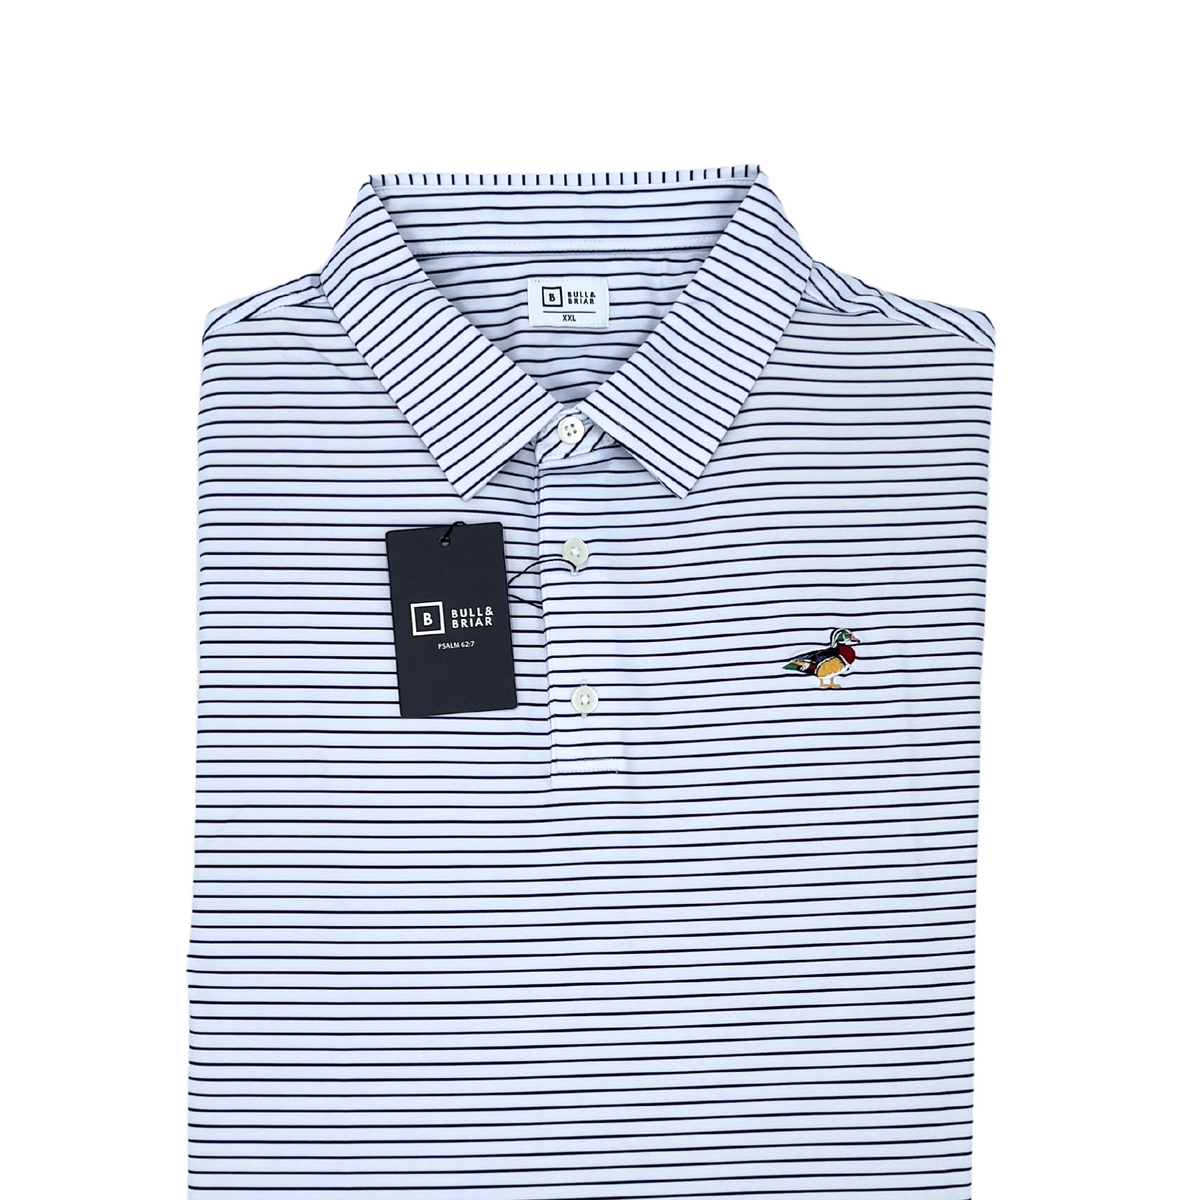 Wrinkle-Free Wood Duck Polo Shirt in White/Black